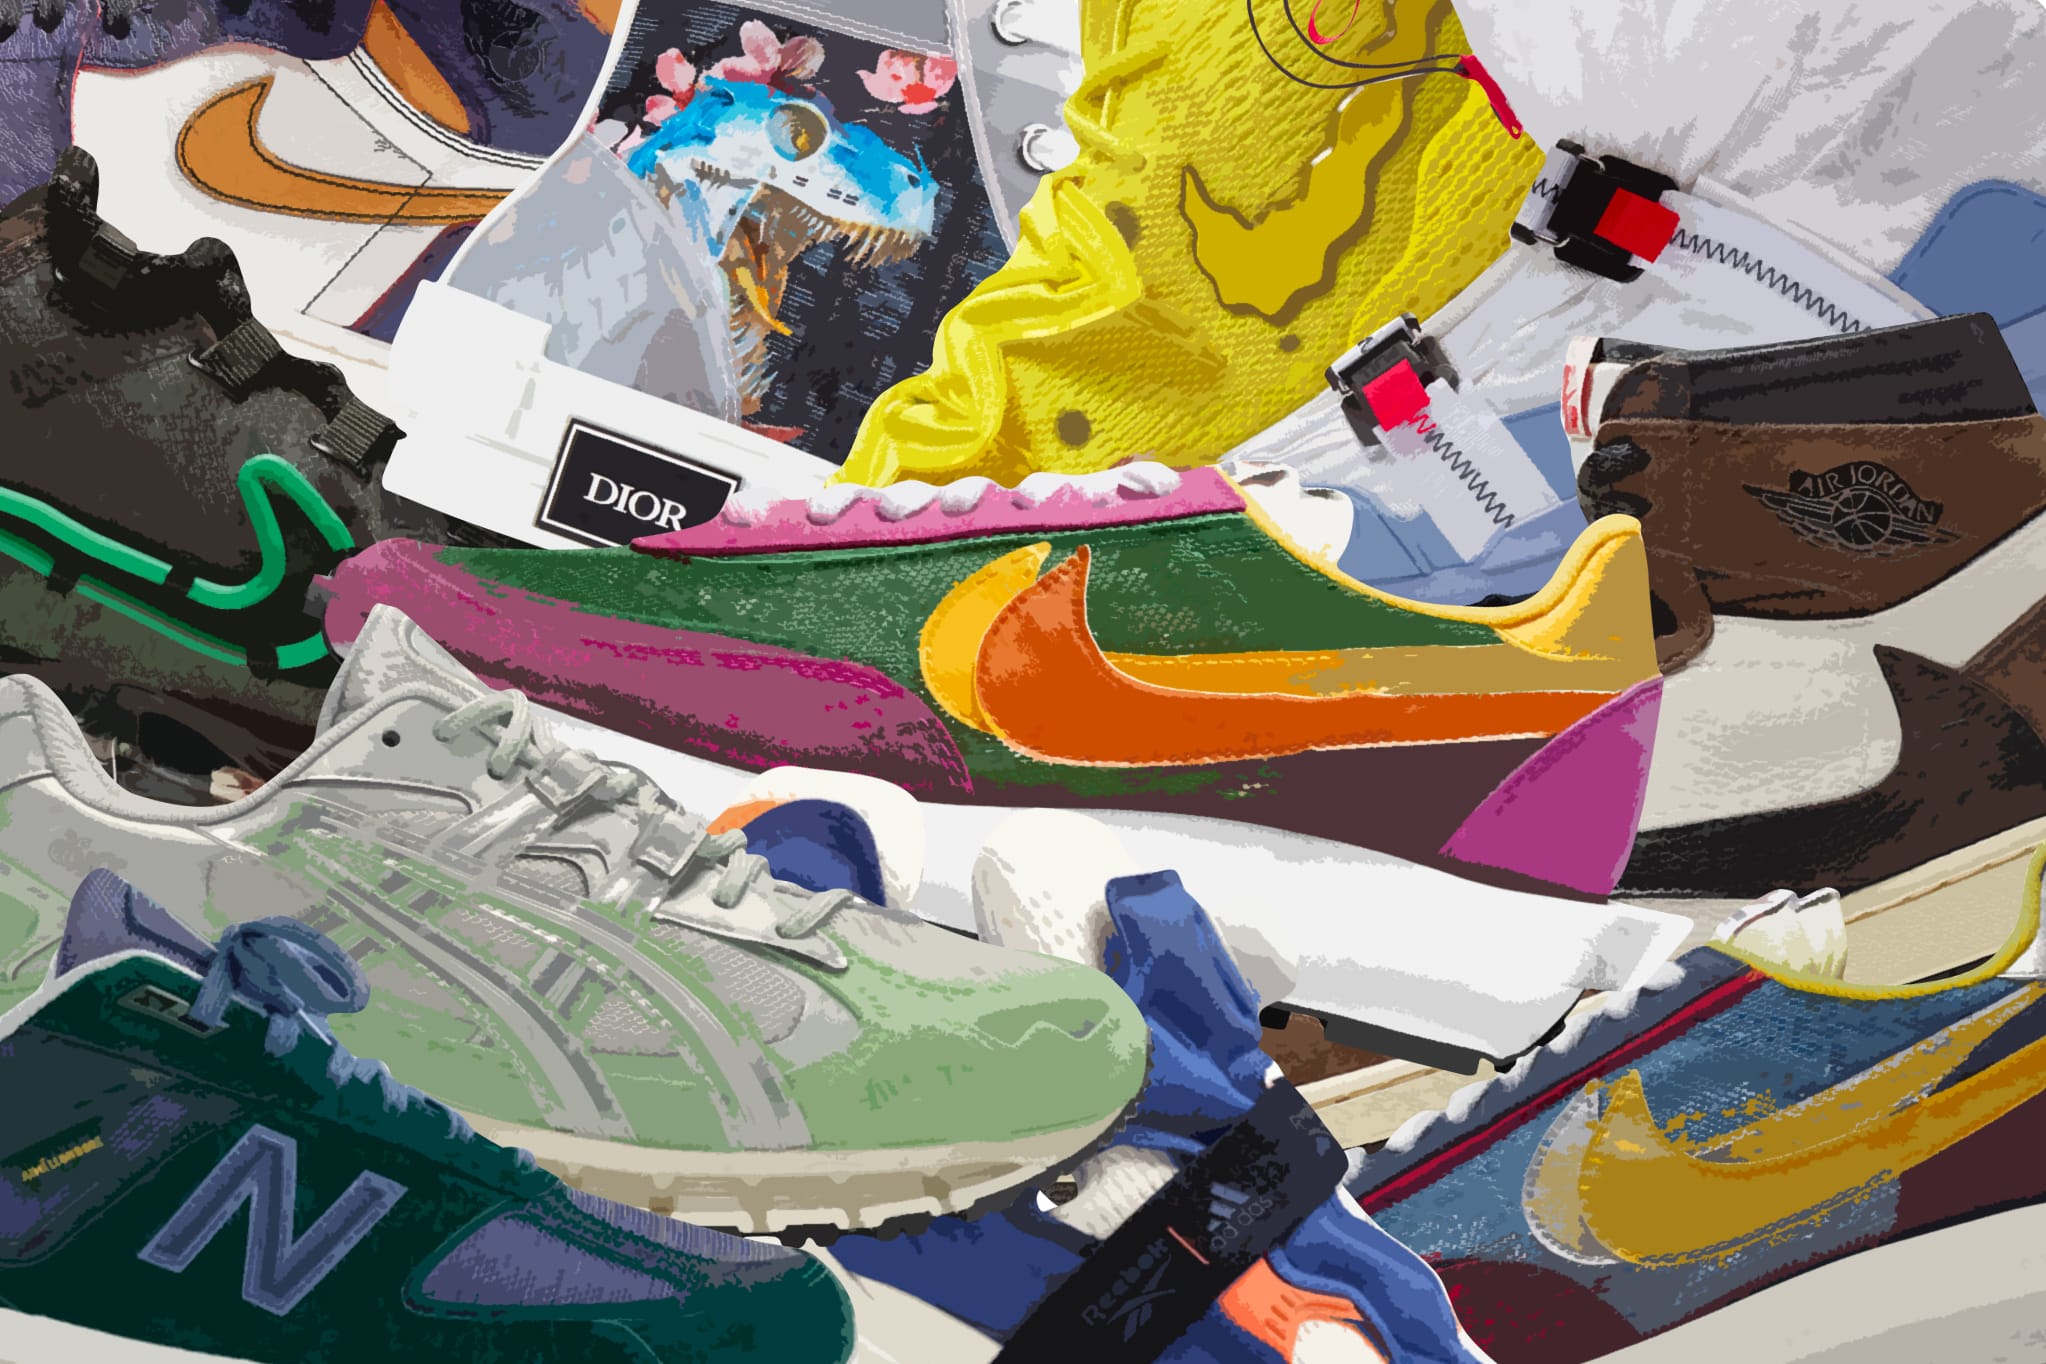 What brands produce the highest quality sneakers? - Quora